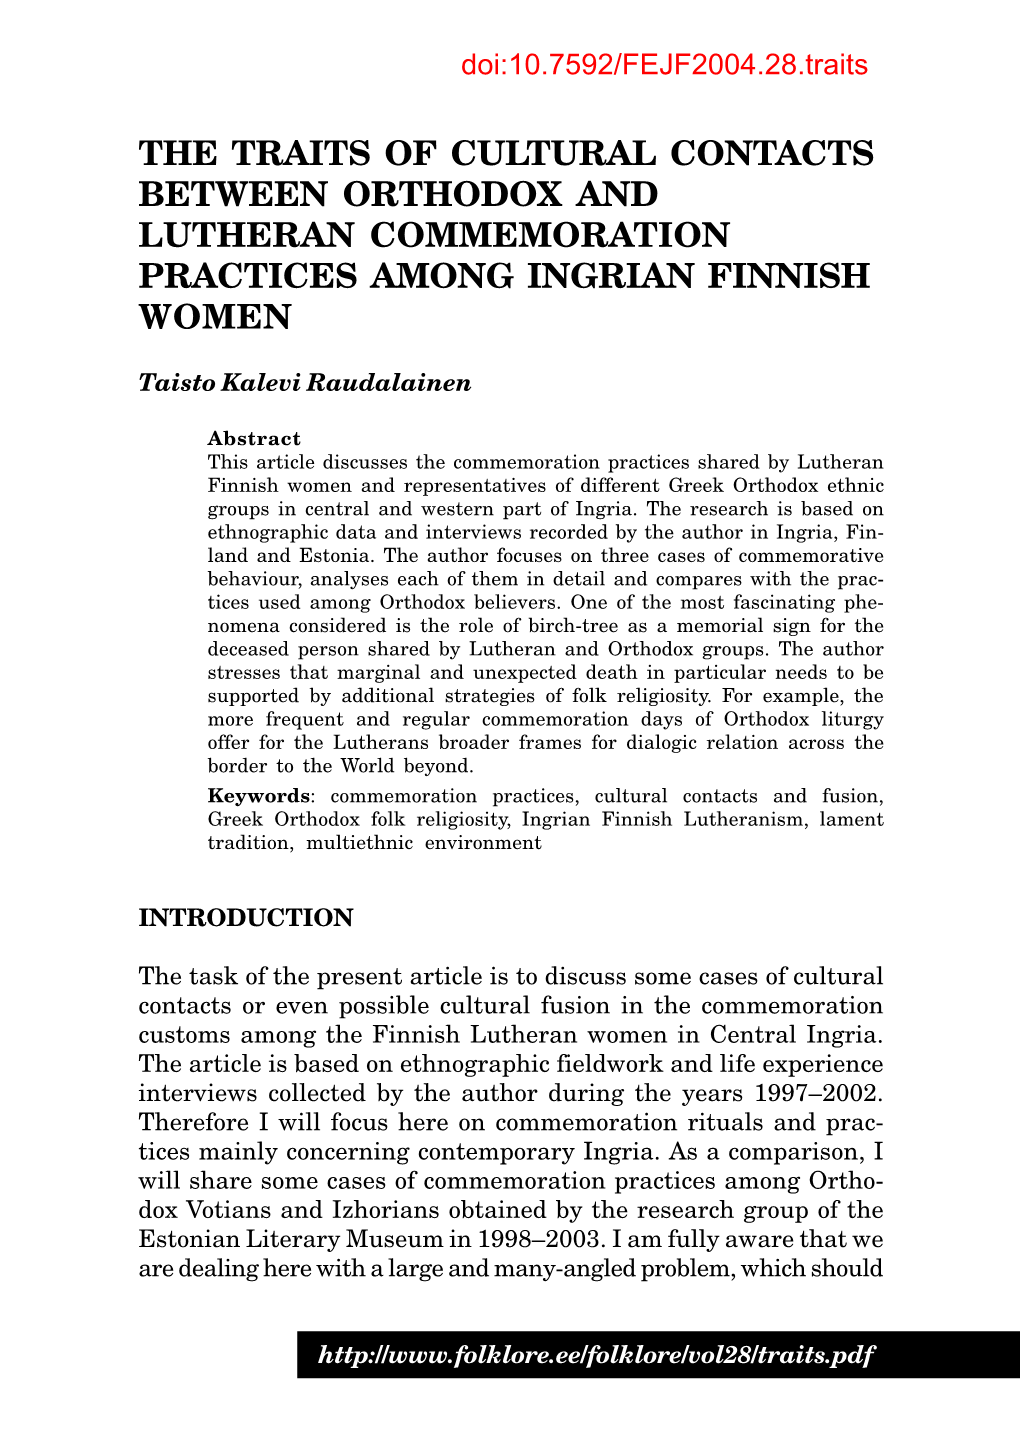 The Traits of Cultural Contacts Between Orthodox and Lutheran Commemoration Practices Among Ingrian Finnish Women